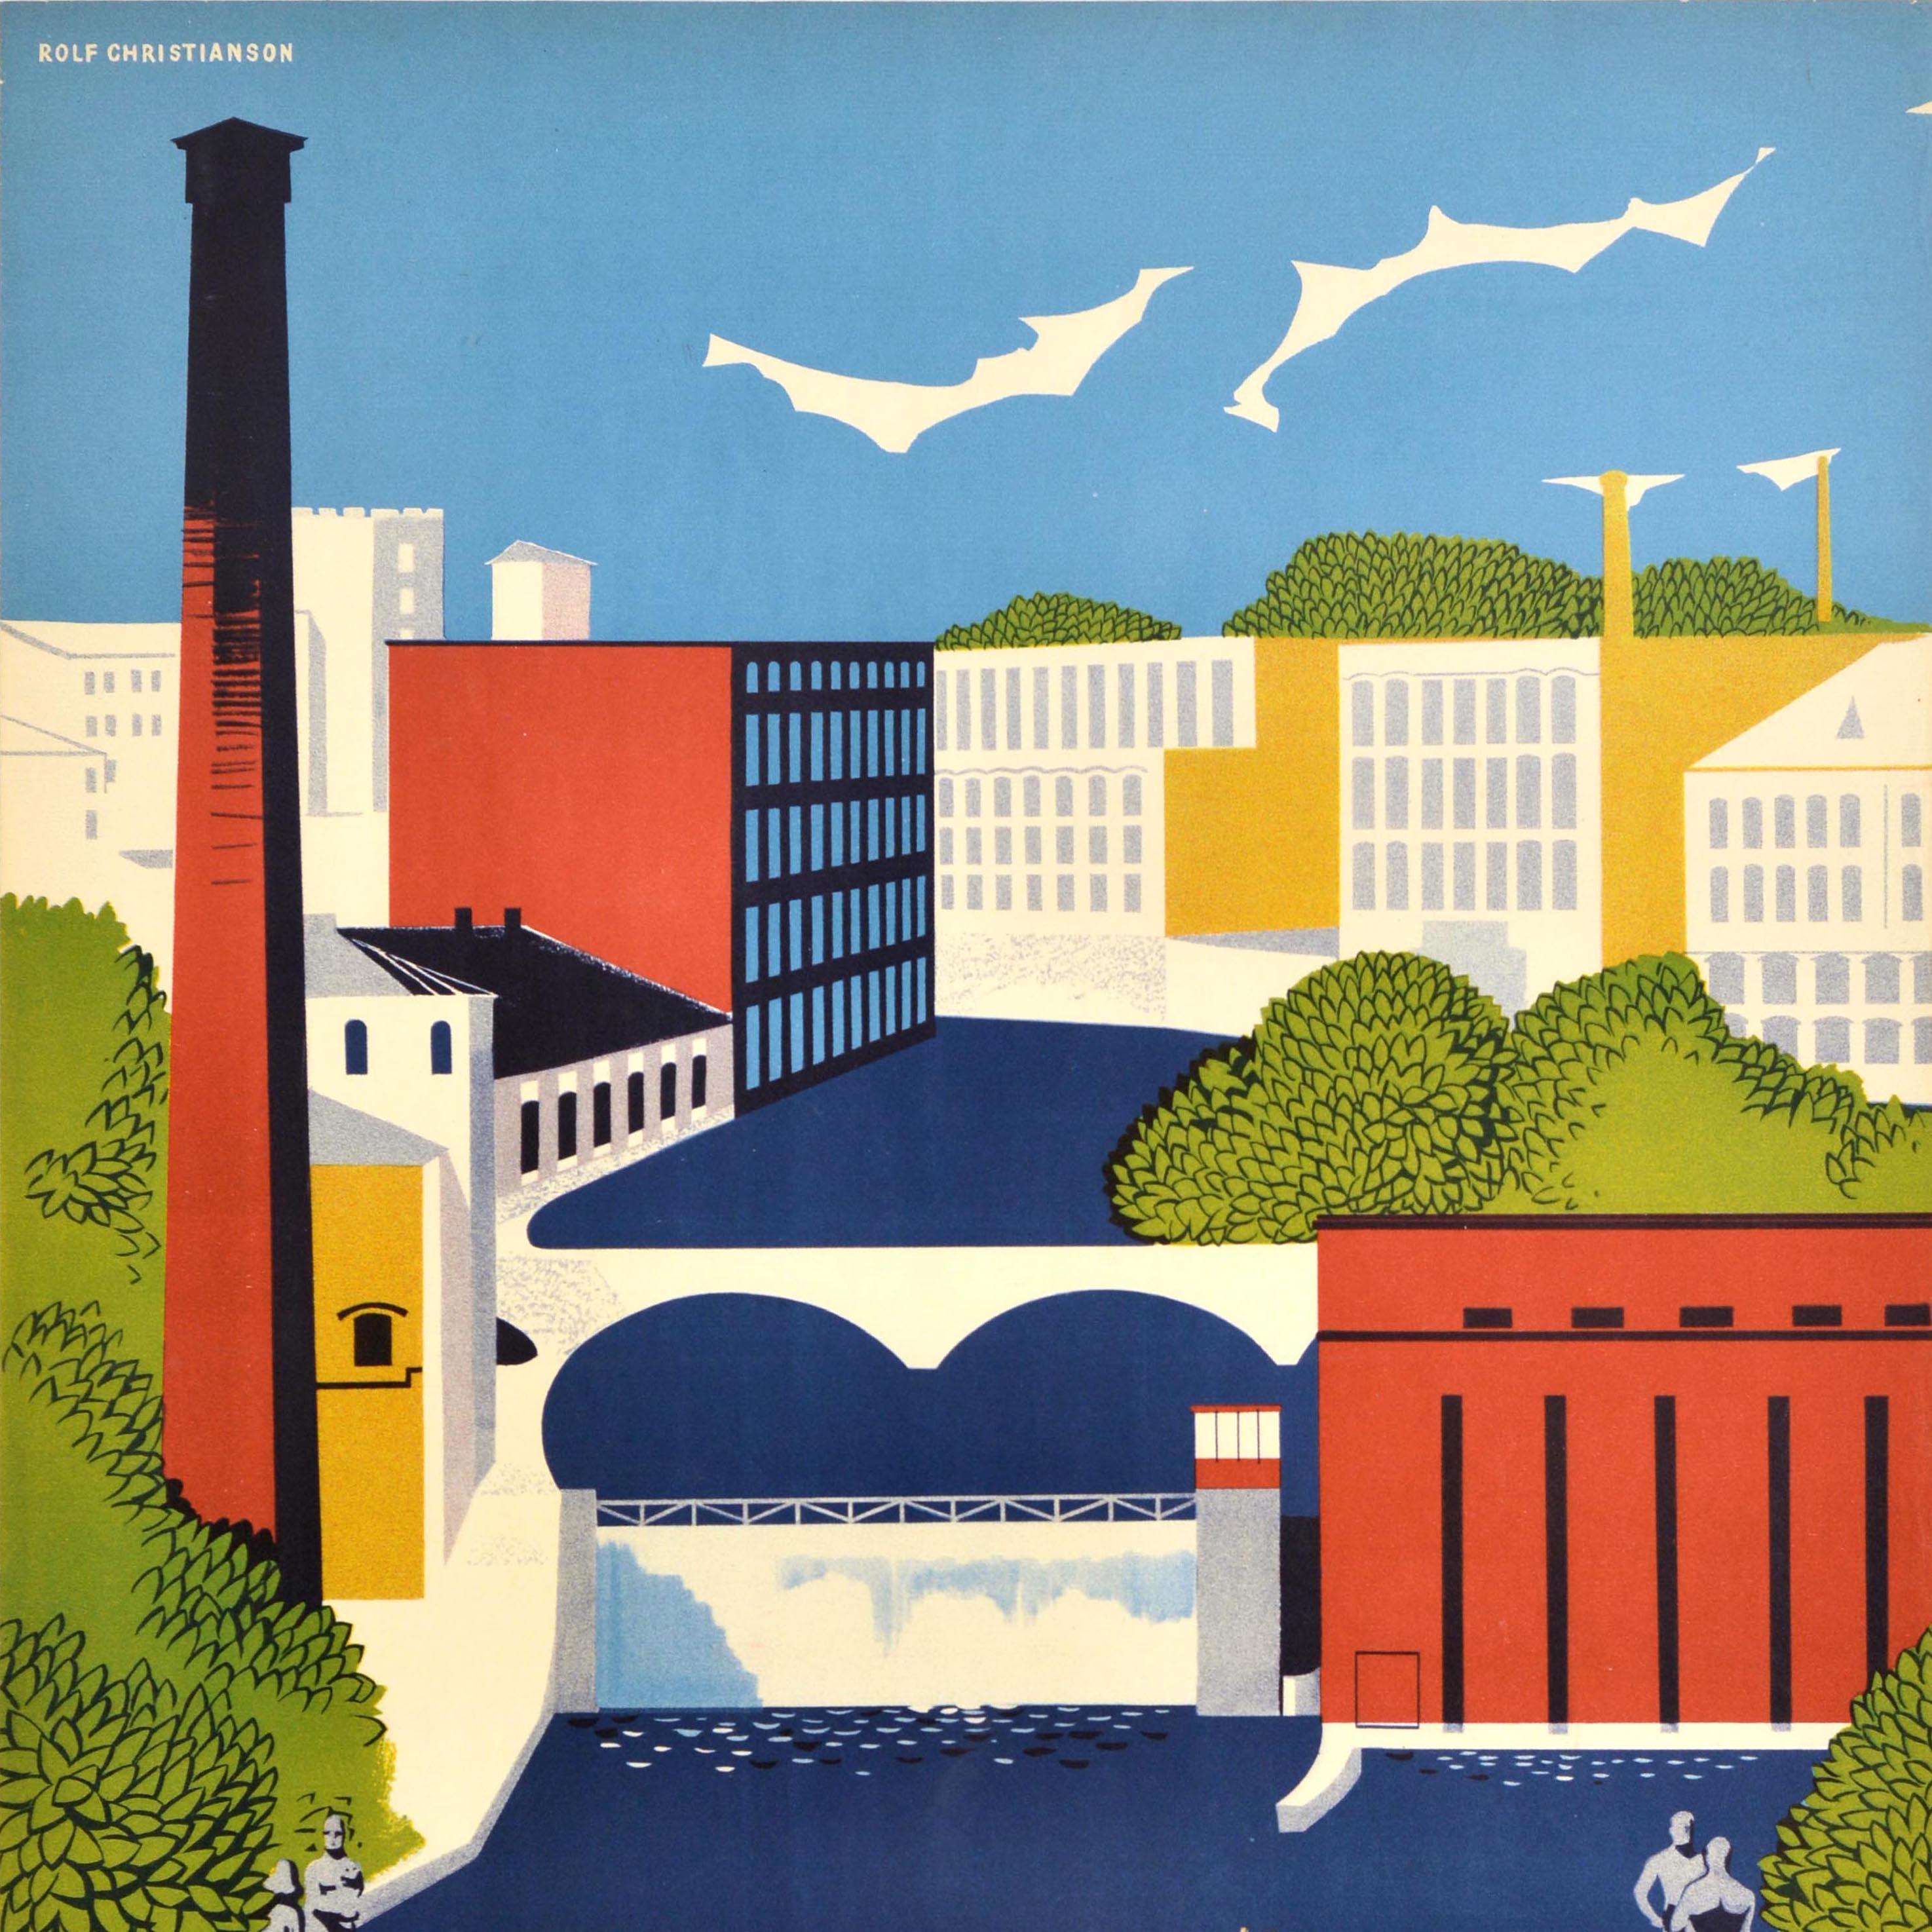 Original vintage travel poster for Tampere designed by Rolf Christianson (1928-1997) featuring people walking, driving and cycling over the stone Hameensilta bridge (Hame Bridge; opened 1929) with its statues at both ends, a few children looking